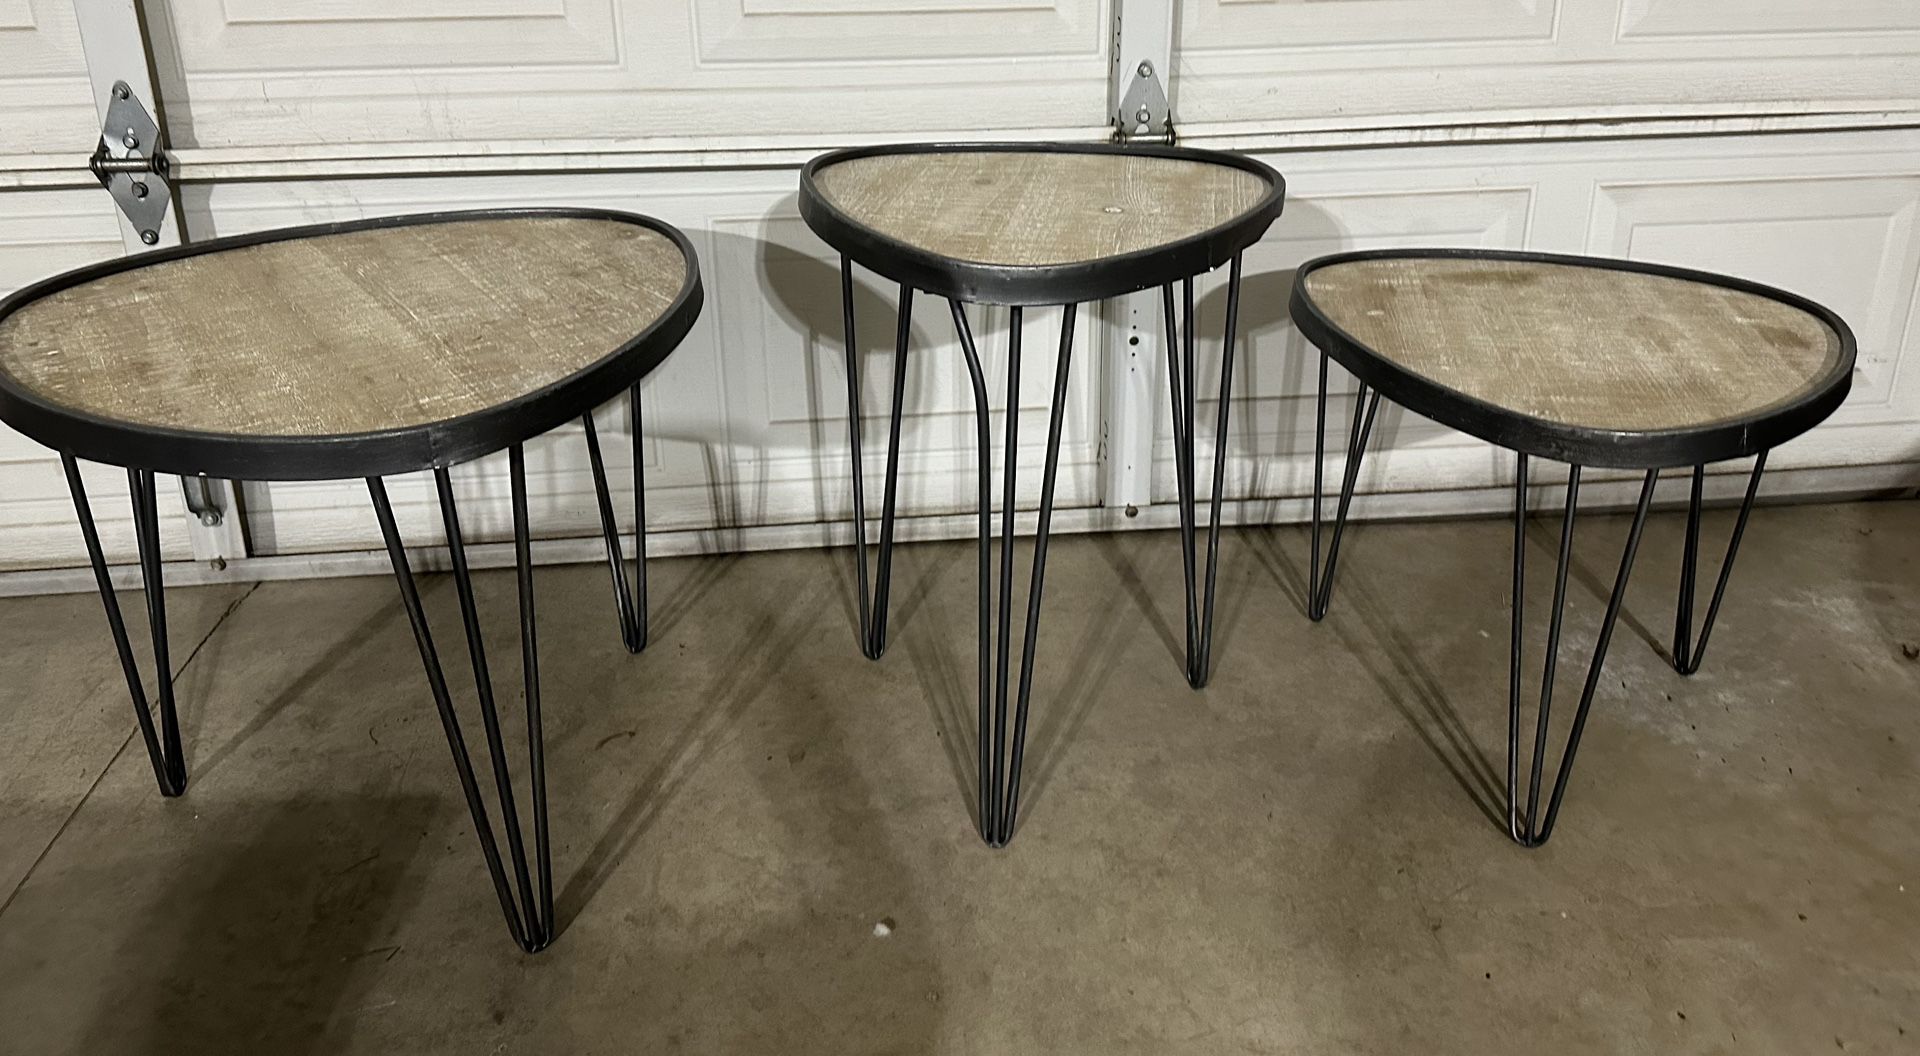 Leaf Shape Metal Tiered Tables Set Of 3 By Evergreen